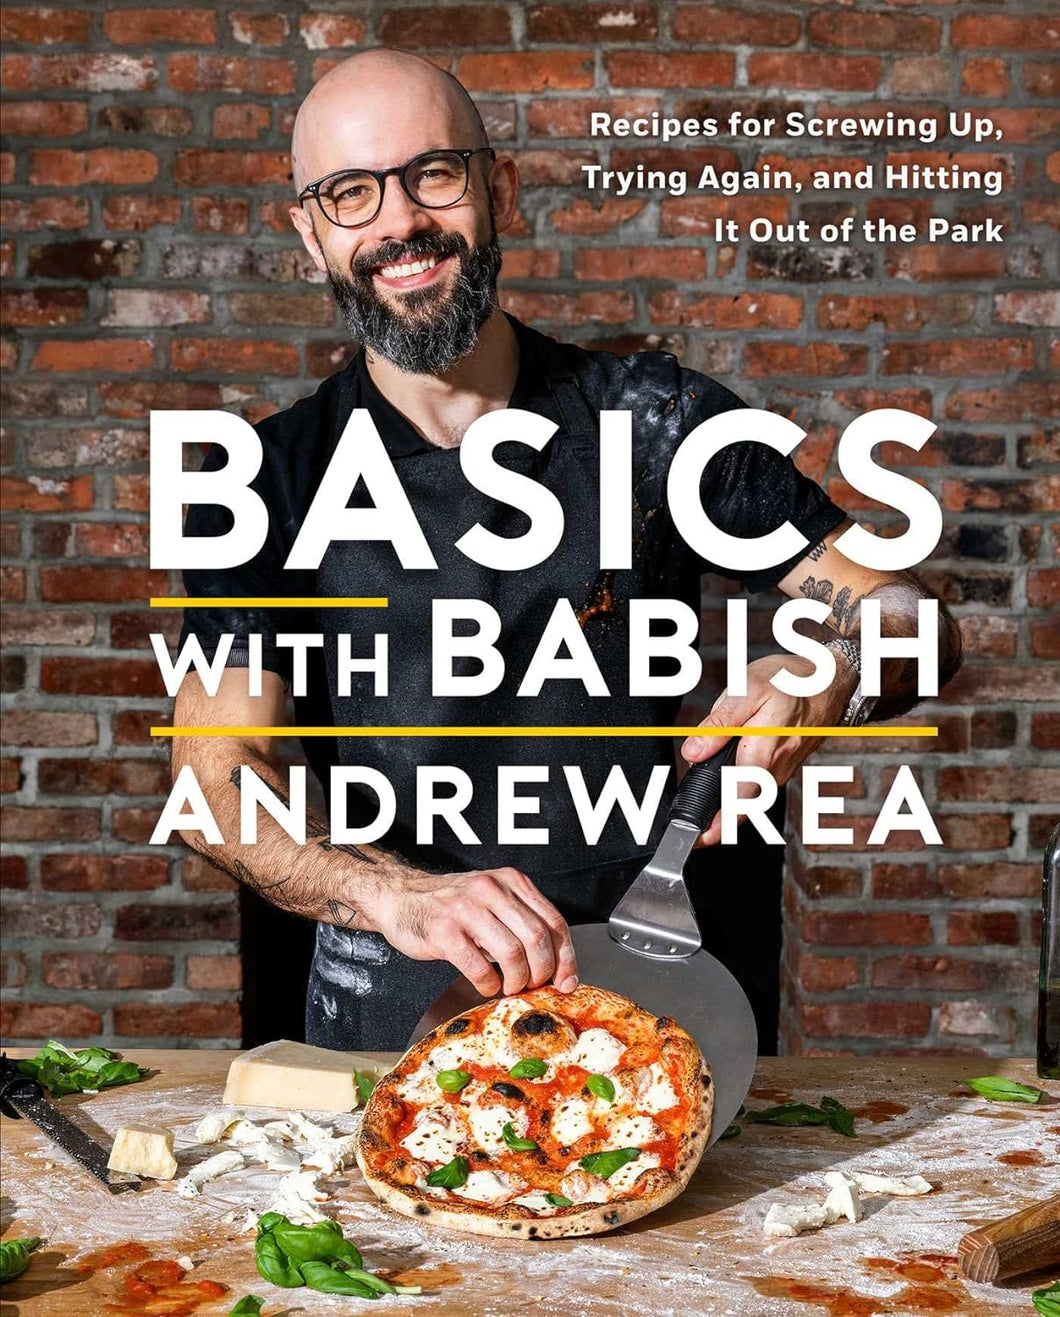 Basics with Babish: Recipes for Screwing Up, Trying Again, and Hitting It Out of the Park (A Cookbook) by Andrew Rea